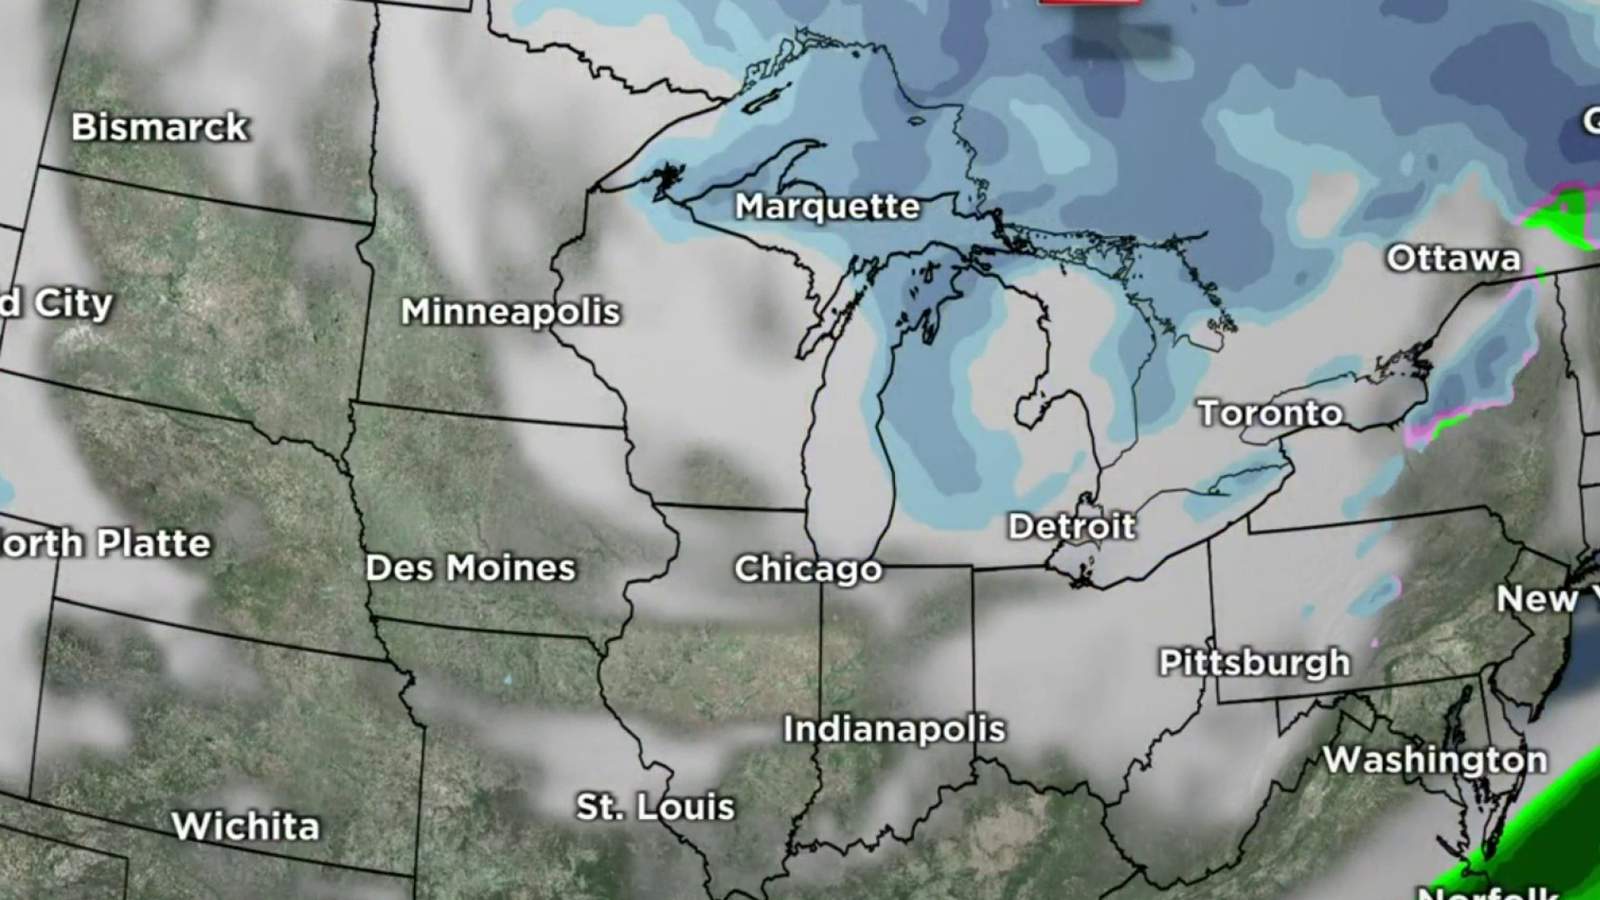 Metro Detroit weather: Expect more snow, frigid air Friday evening through weekend